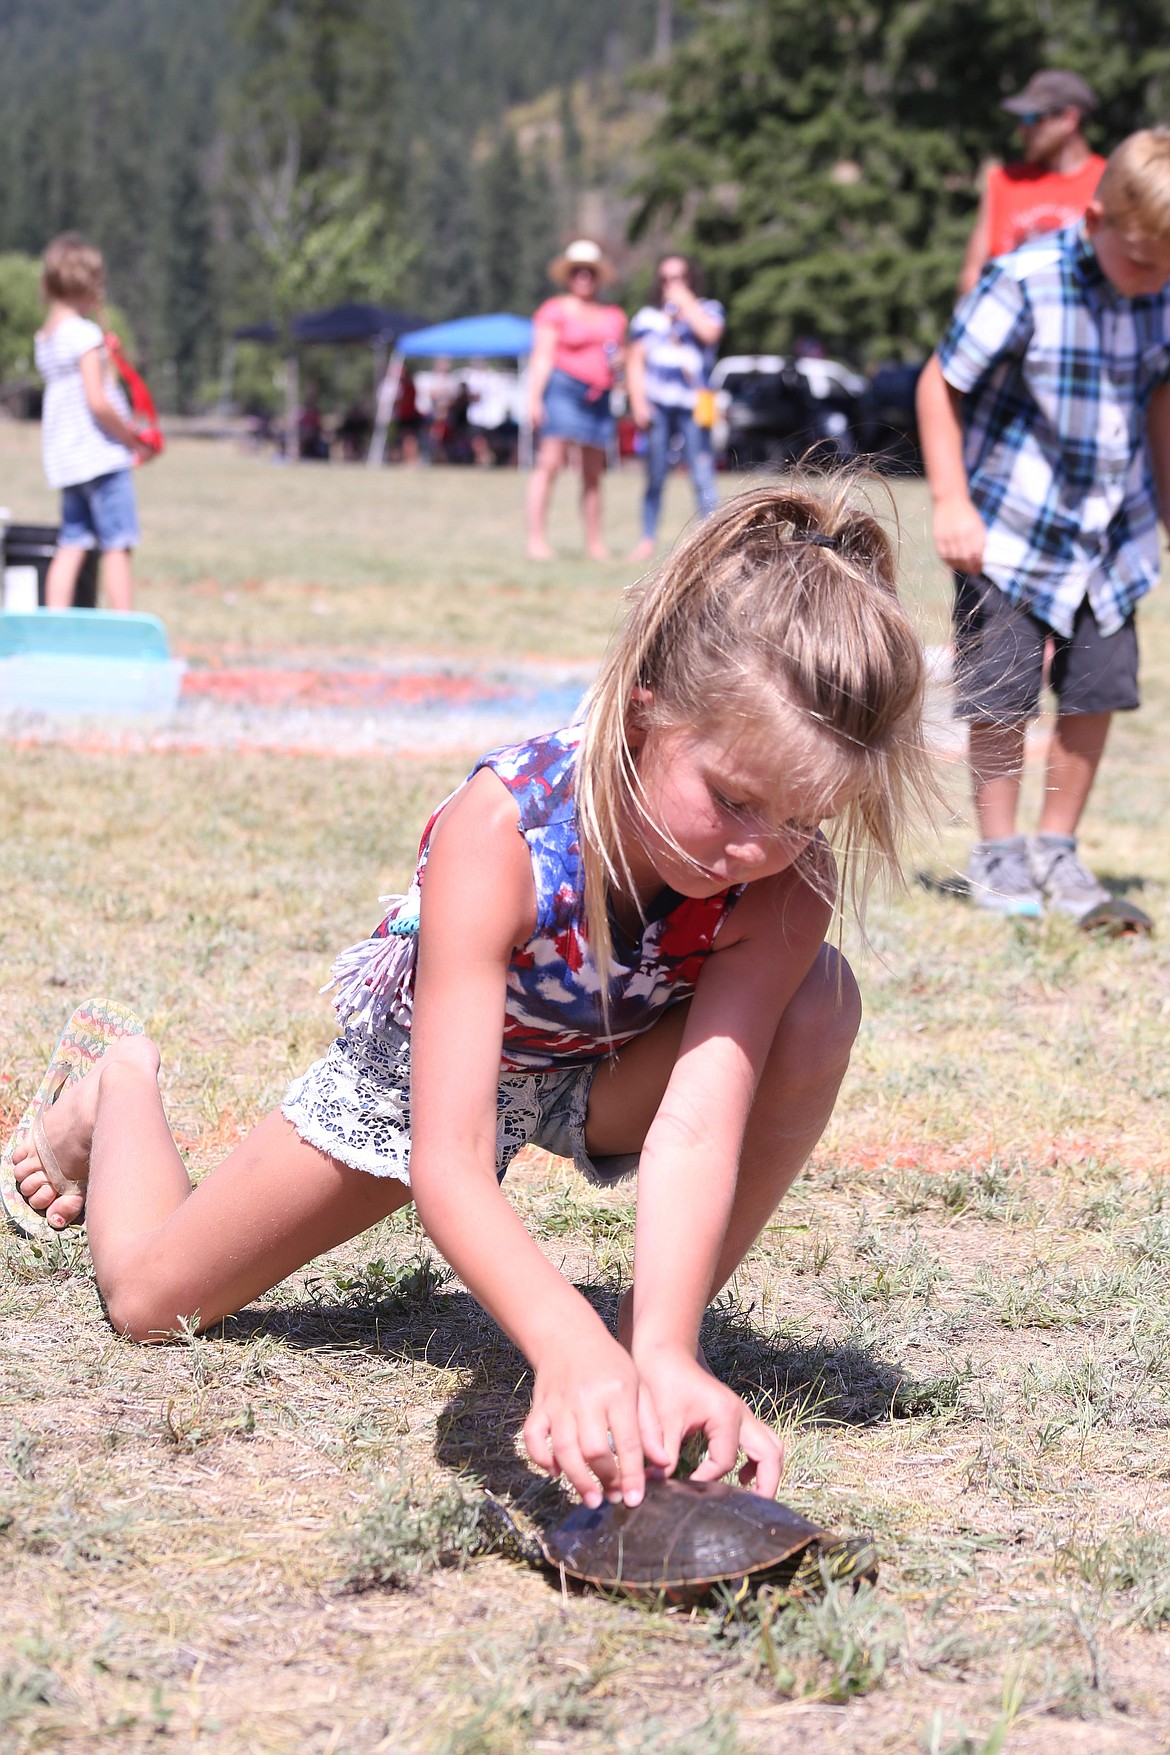 Kids aged two to 10 participated in the turtle racing event of the Old Fashioned Fourth of July celebration sponsored by the Rod and Gun Club. 
The turtles got "too hot" after the 10 year old age group.